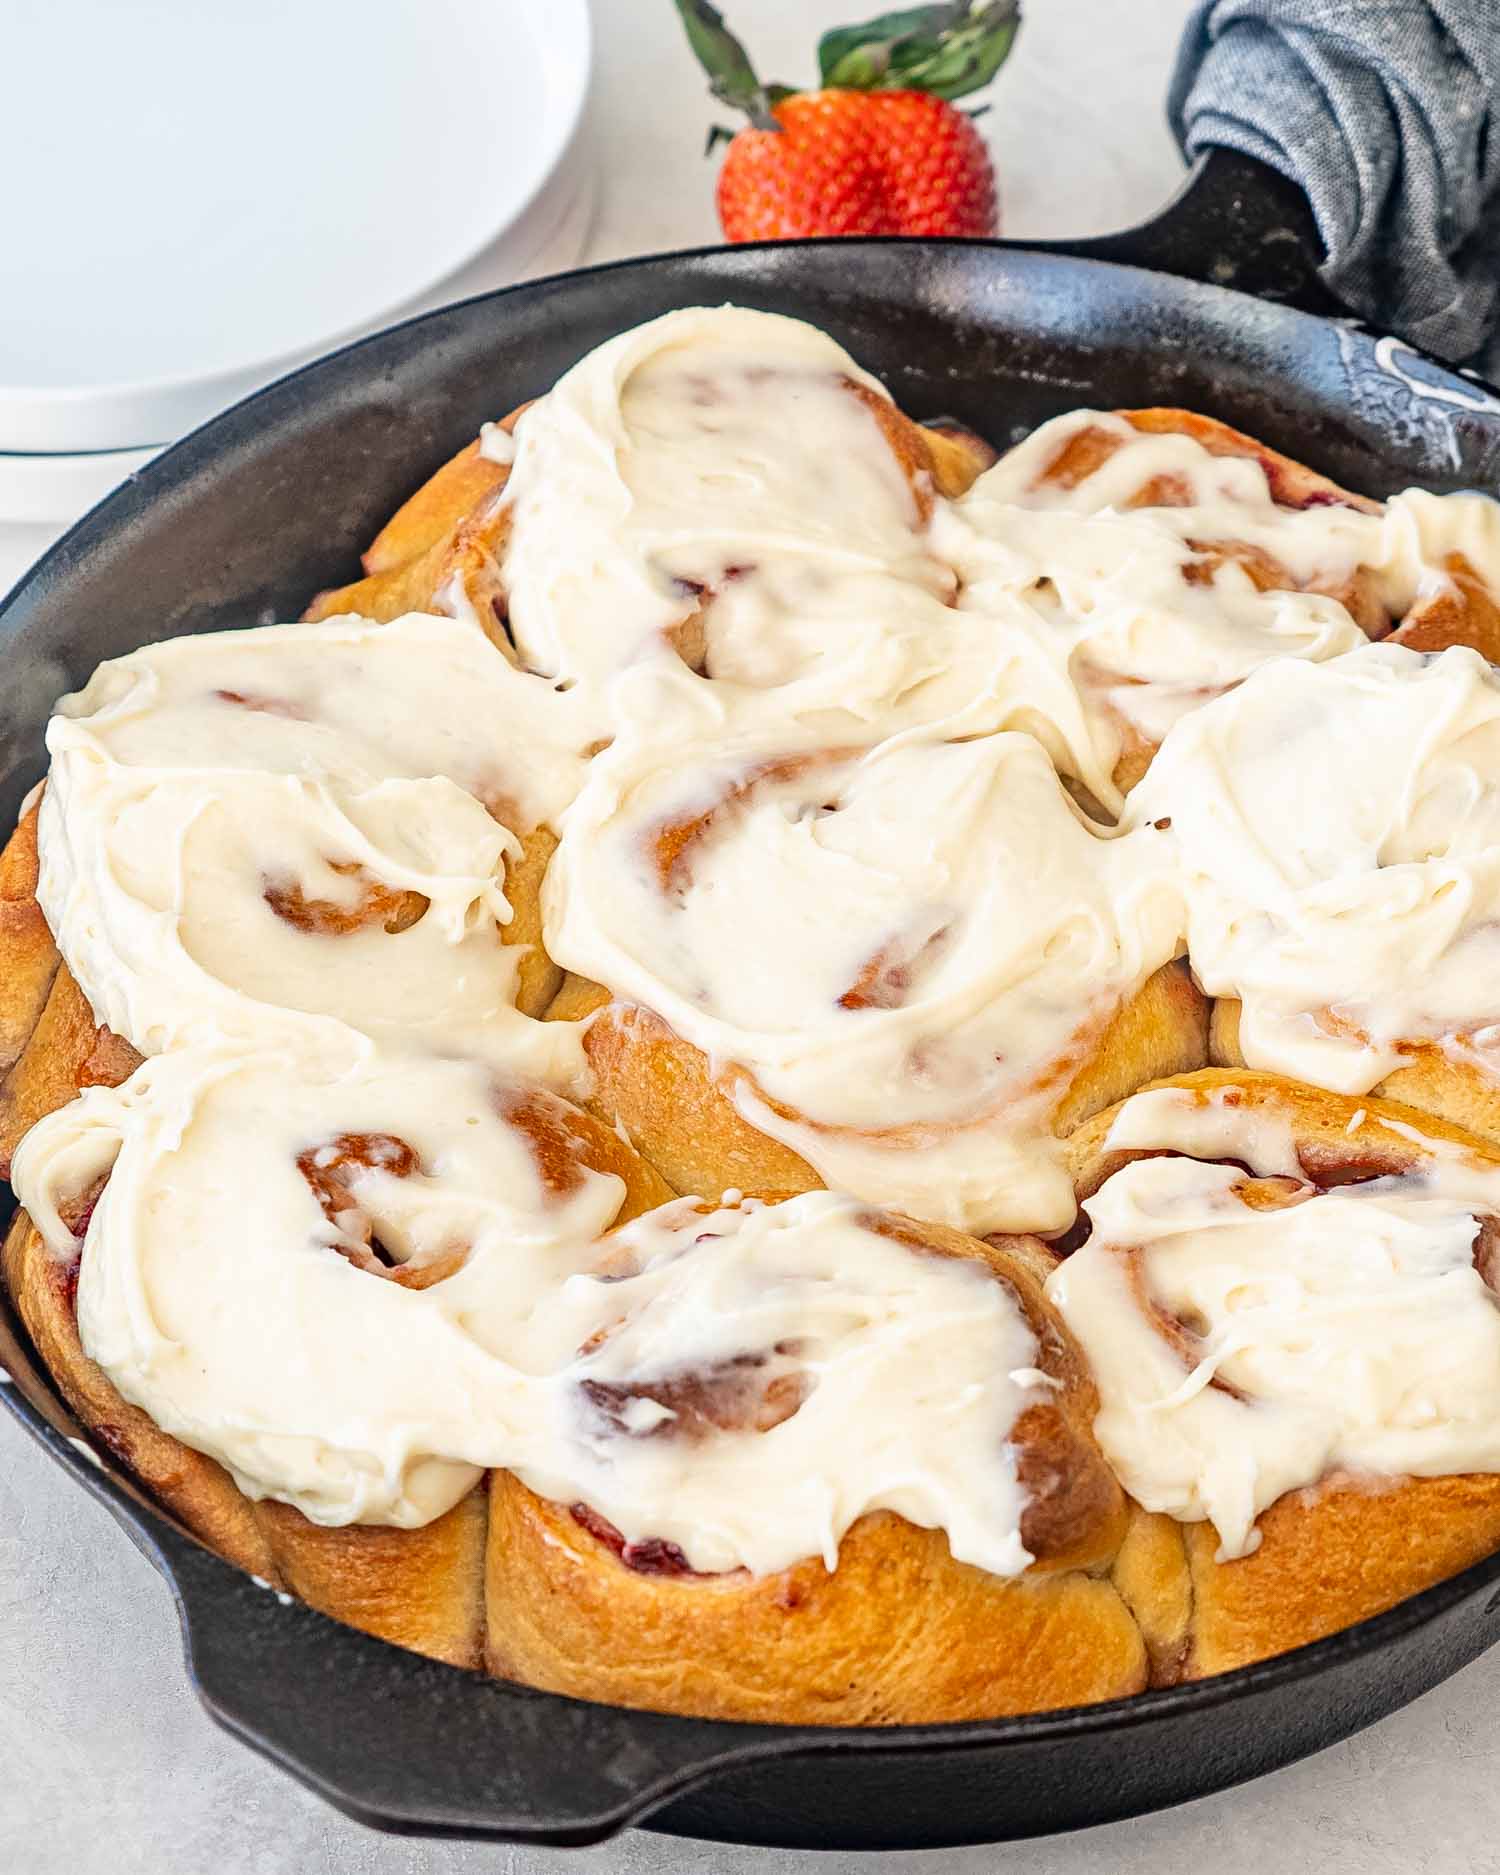 strawberry rolls with cream cheese icing in a cast iron skillet.